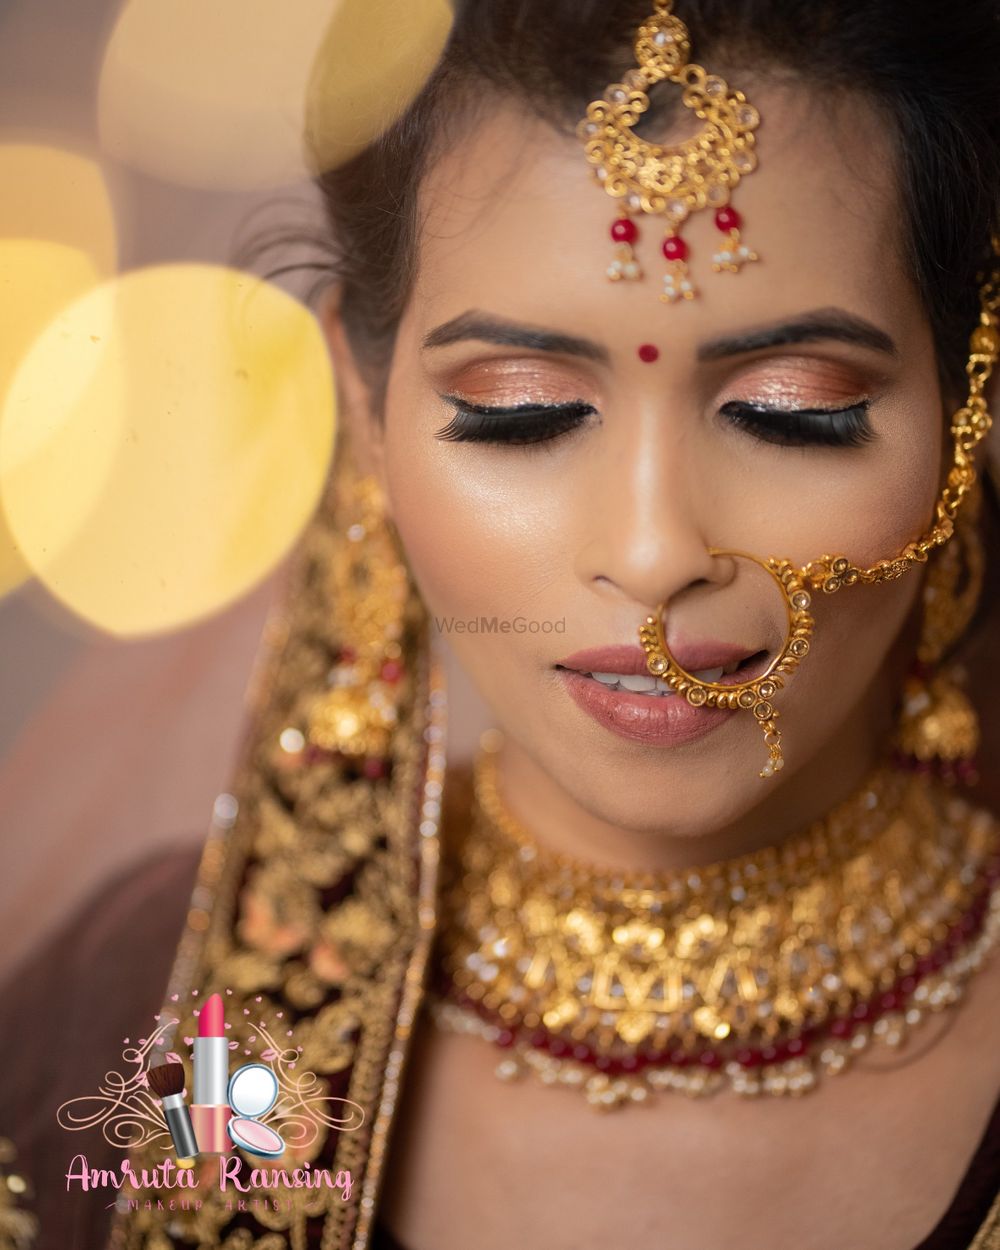 Photo From Brides of AR - By Amruta Ransing Makeup Artist